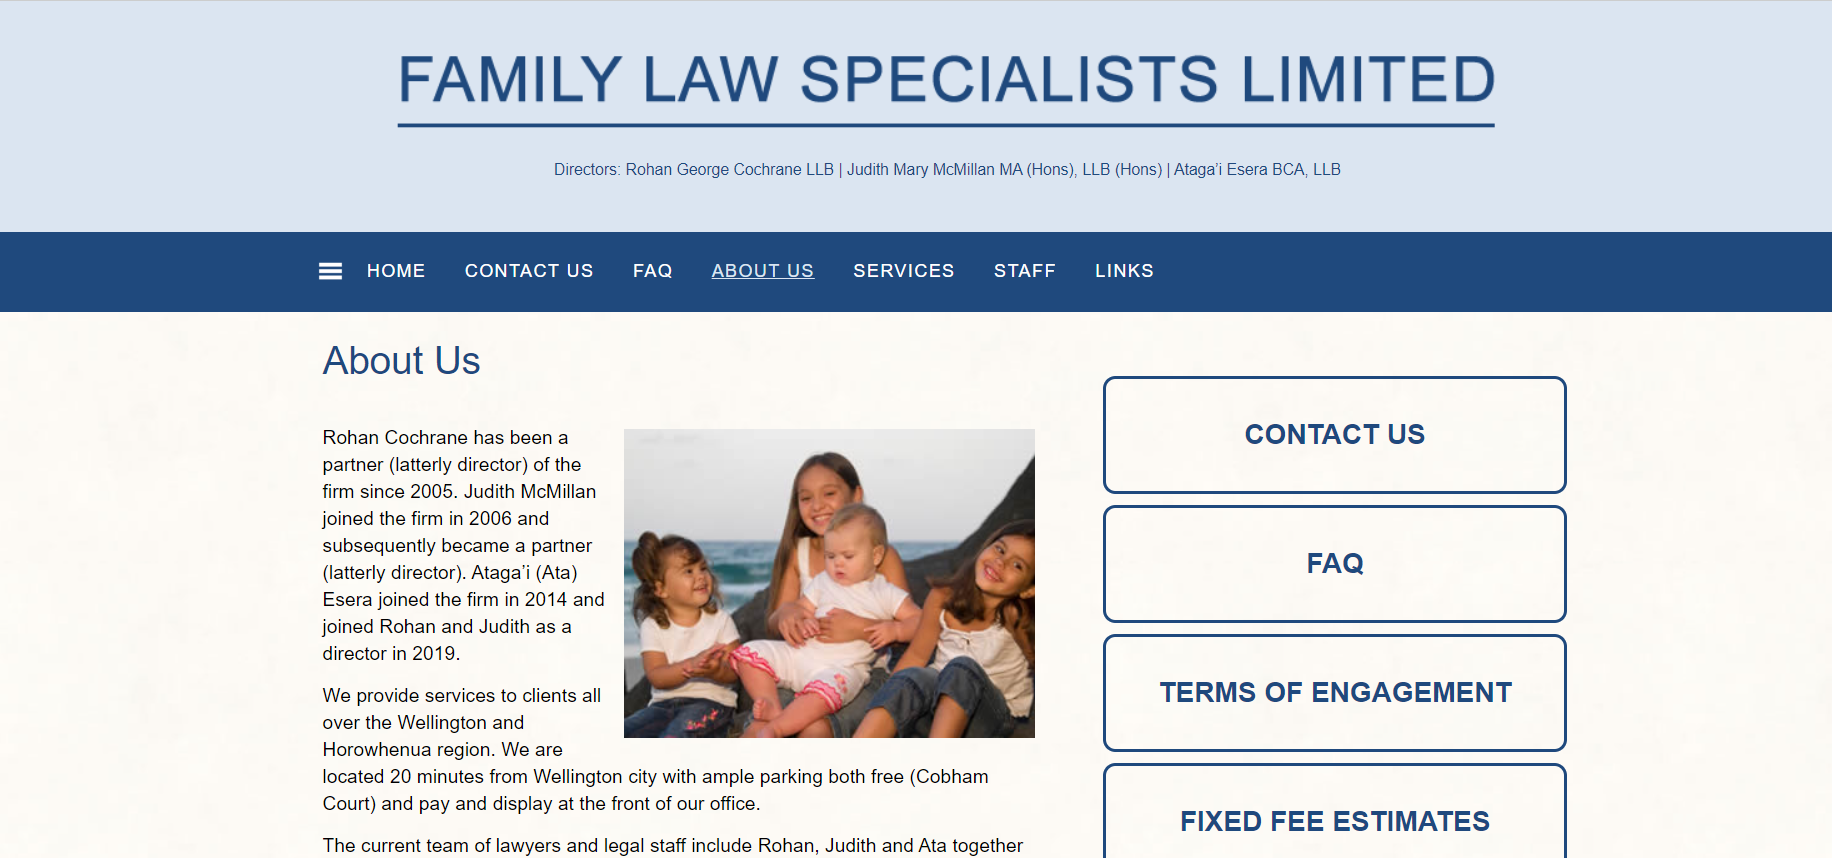 The Family Law Specialists